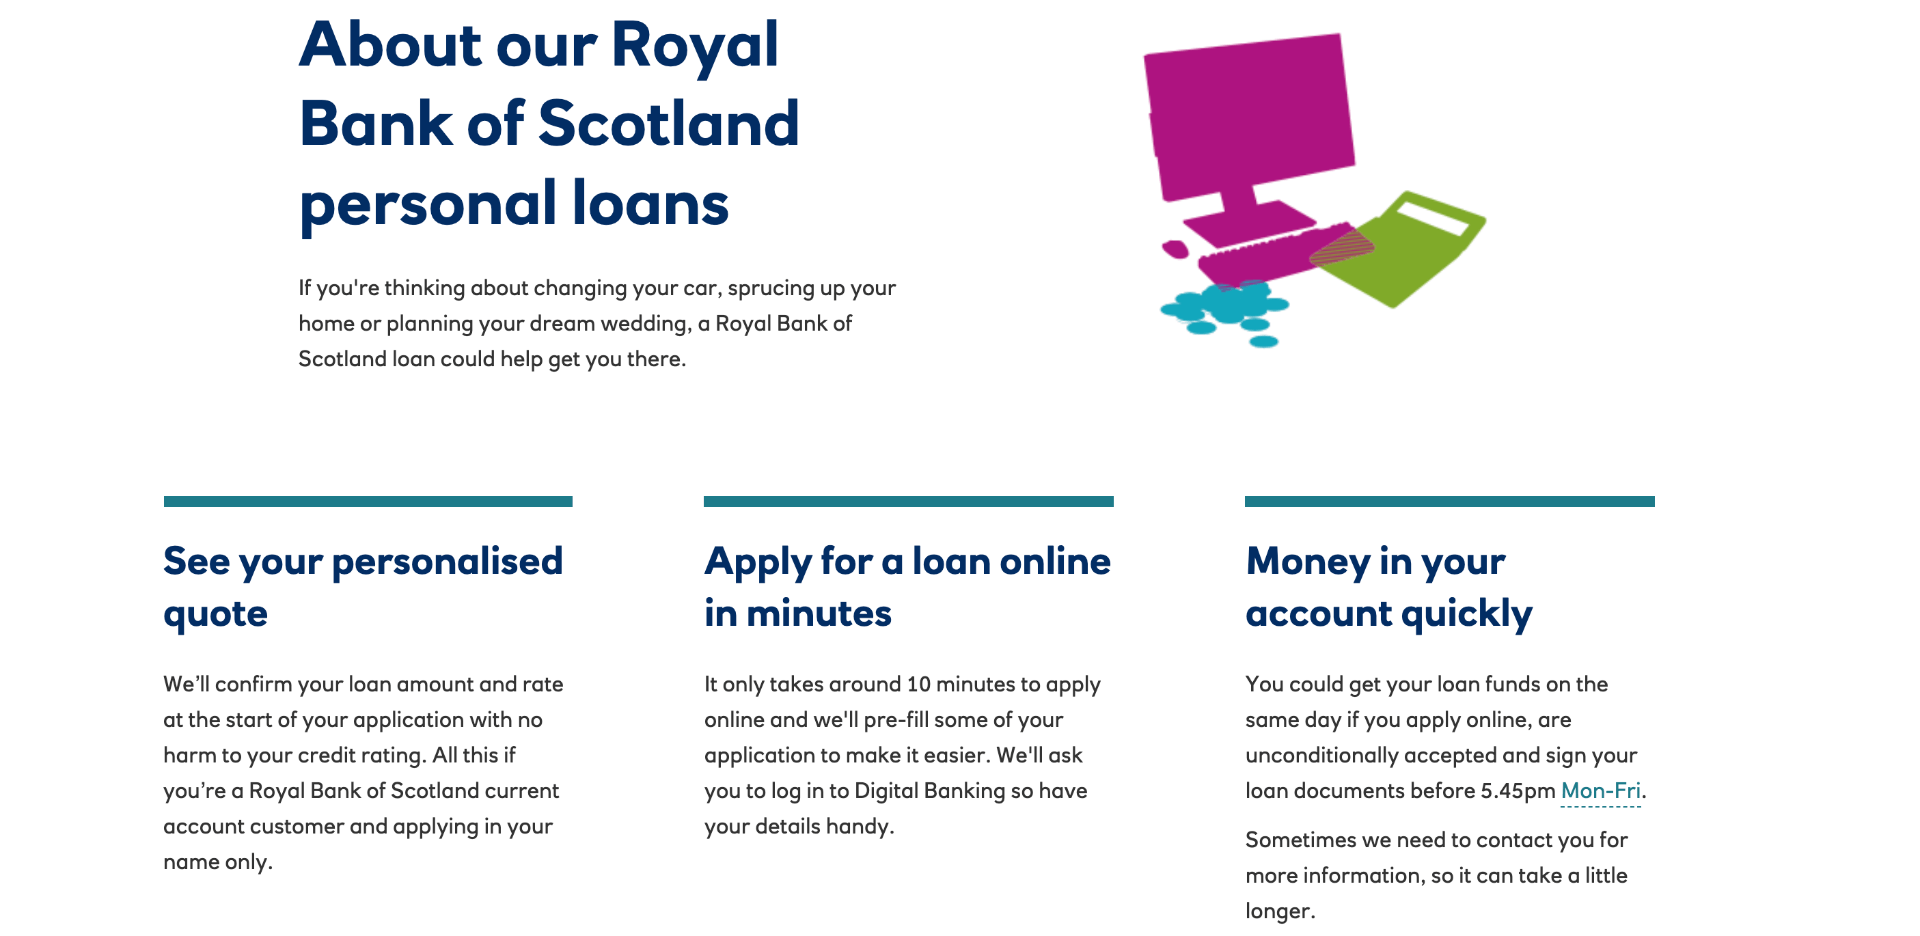 Personal Loan from Royal Bank of Scotland: Discover All the Benefits Before Ordering